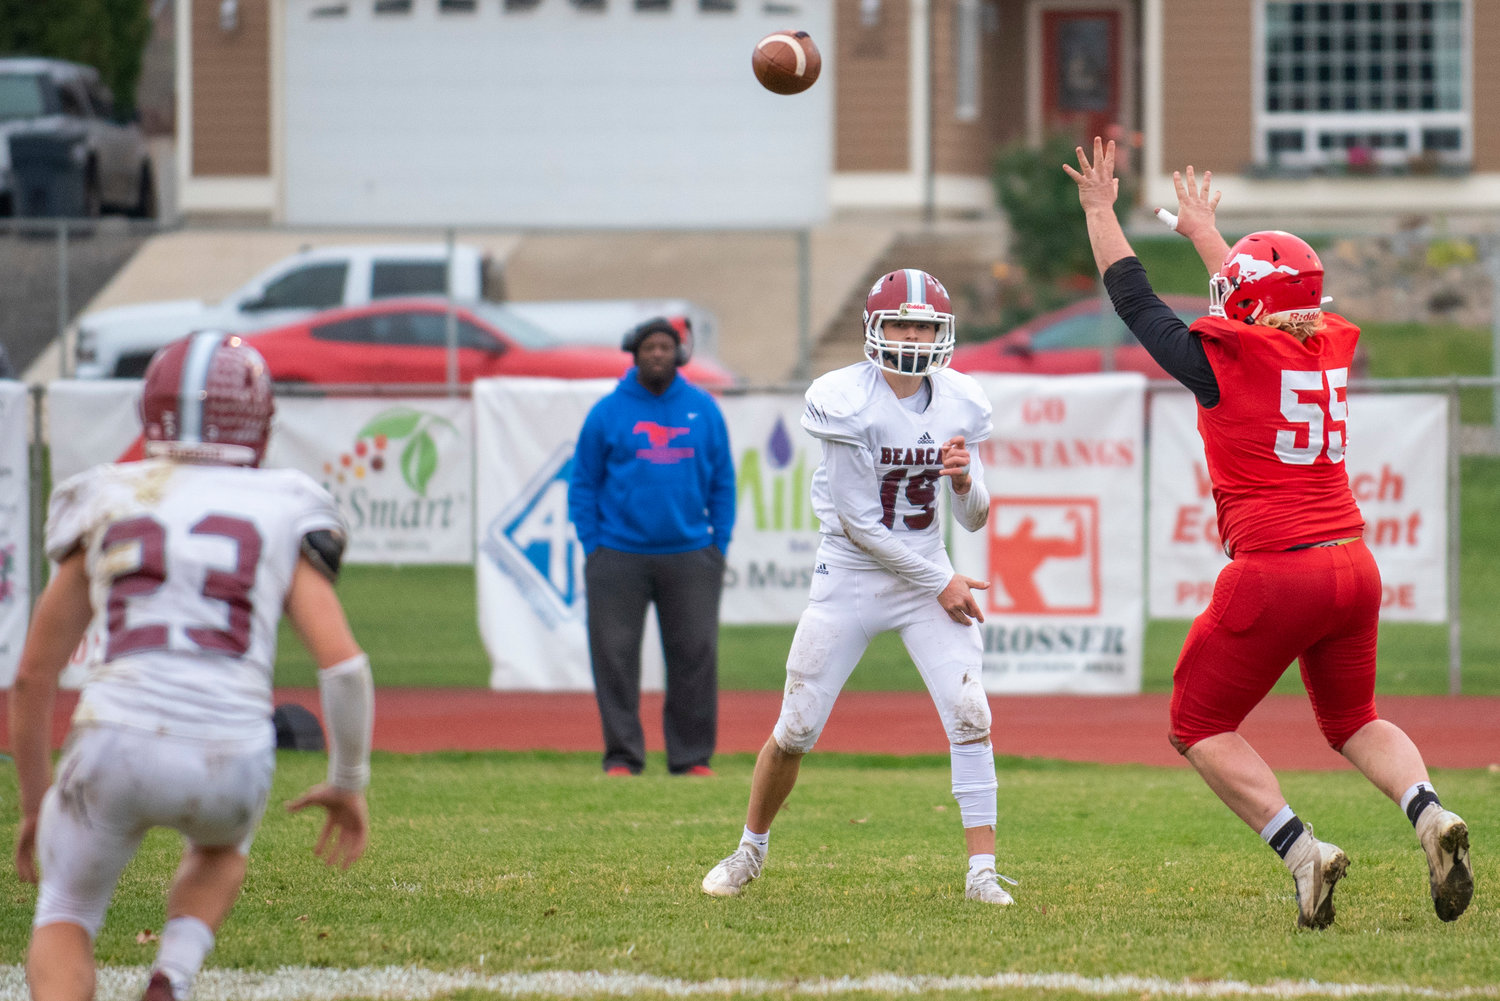 W.F. West QB Gage Brumfield (19) tosses a pass to Evan Stajduhar (23) against Prosser on Saturday.